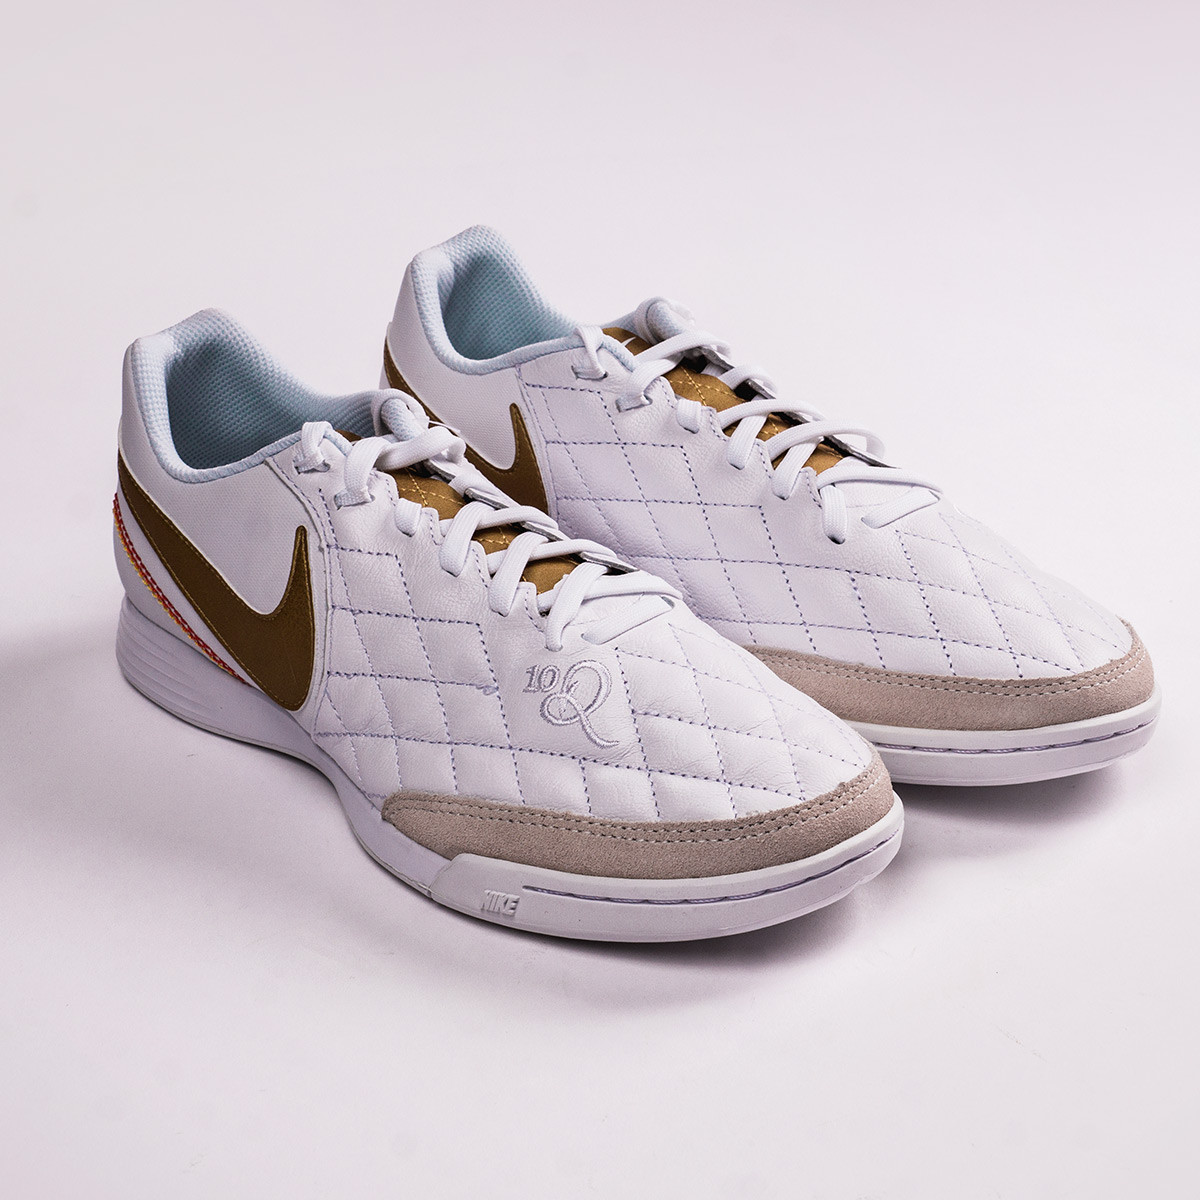 Nike R10 Collection 2 - Blogs - Fútbol Emotion